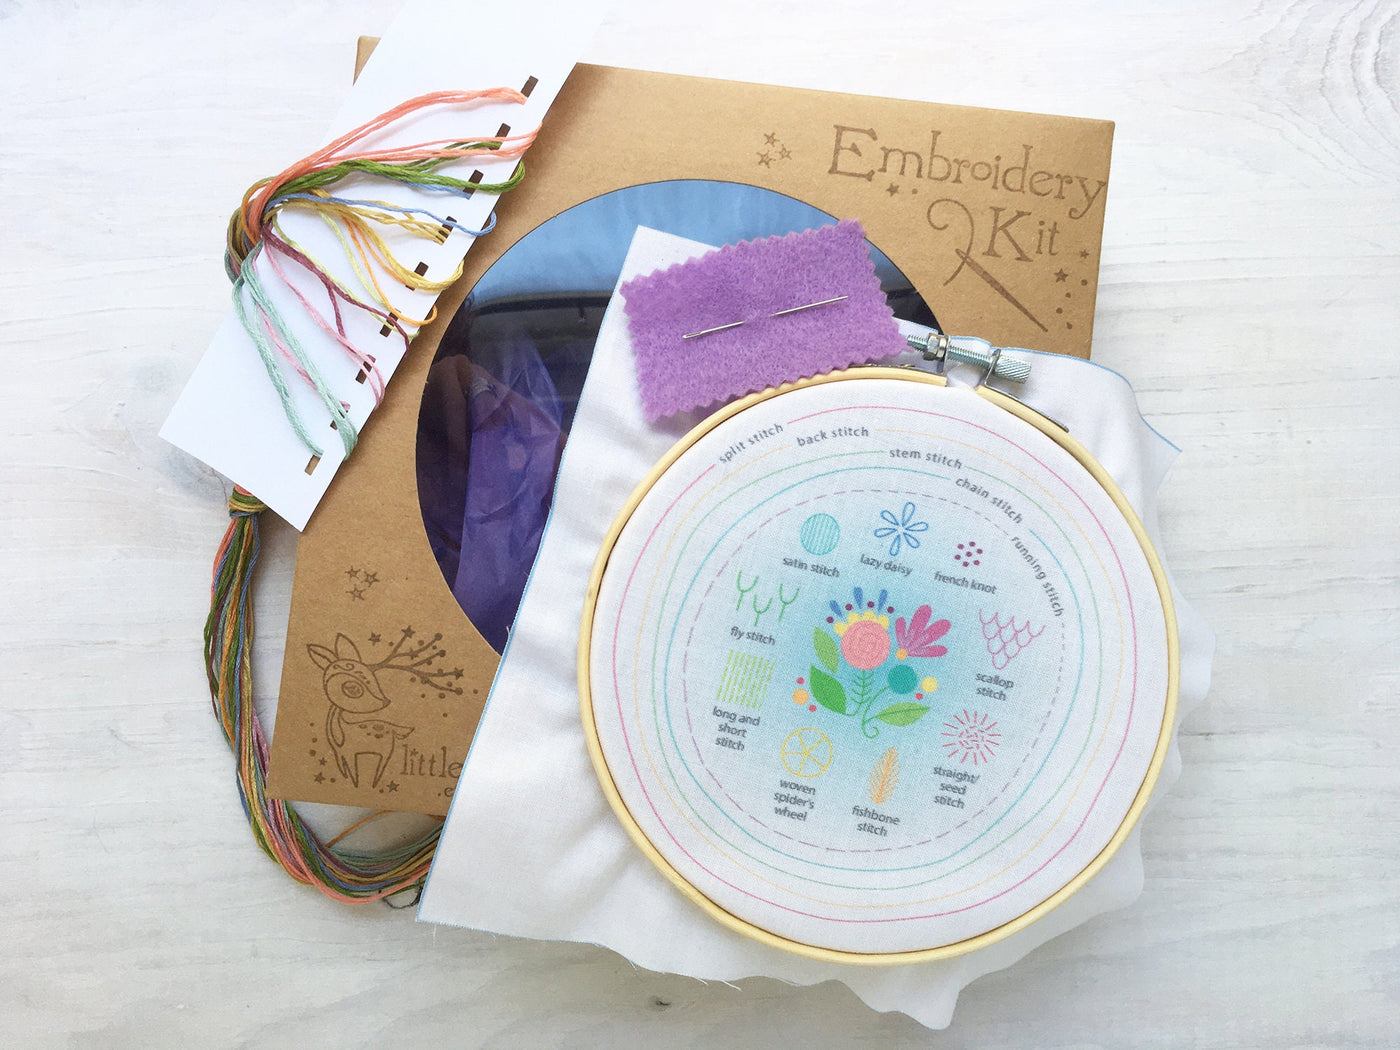 Starter Craft Kit: Learn to embroider